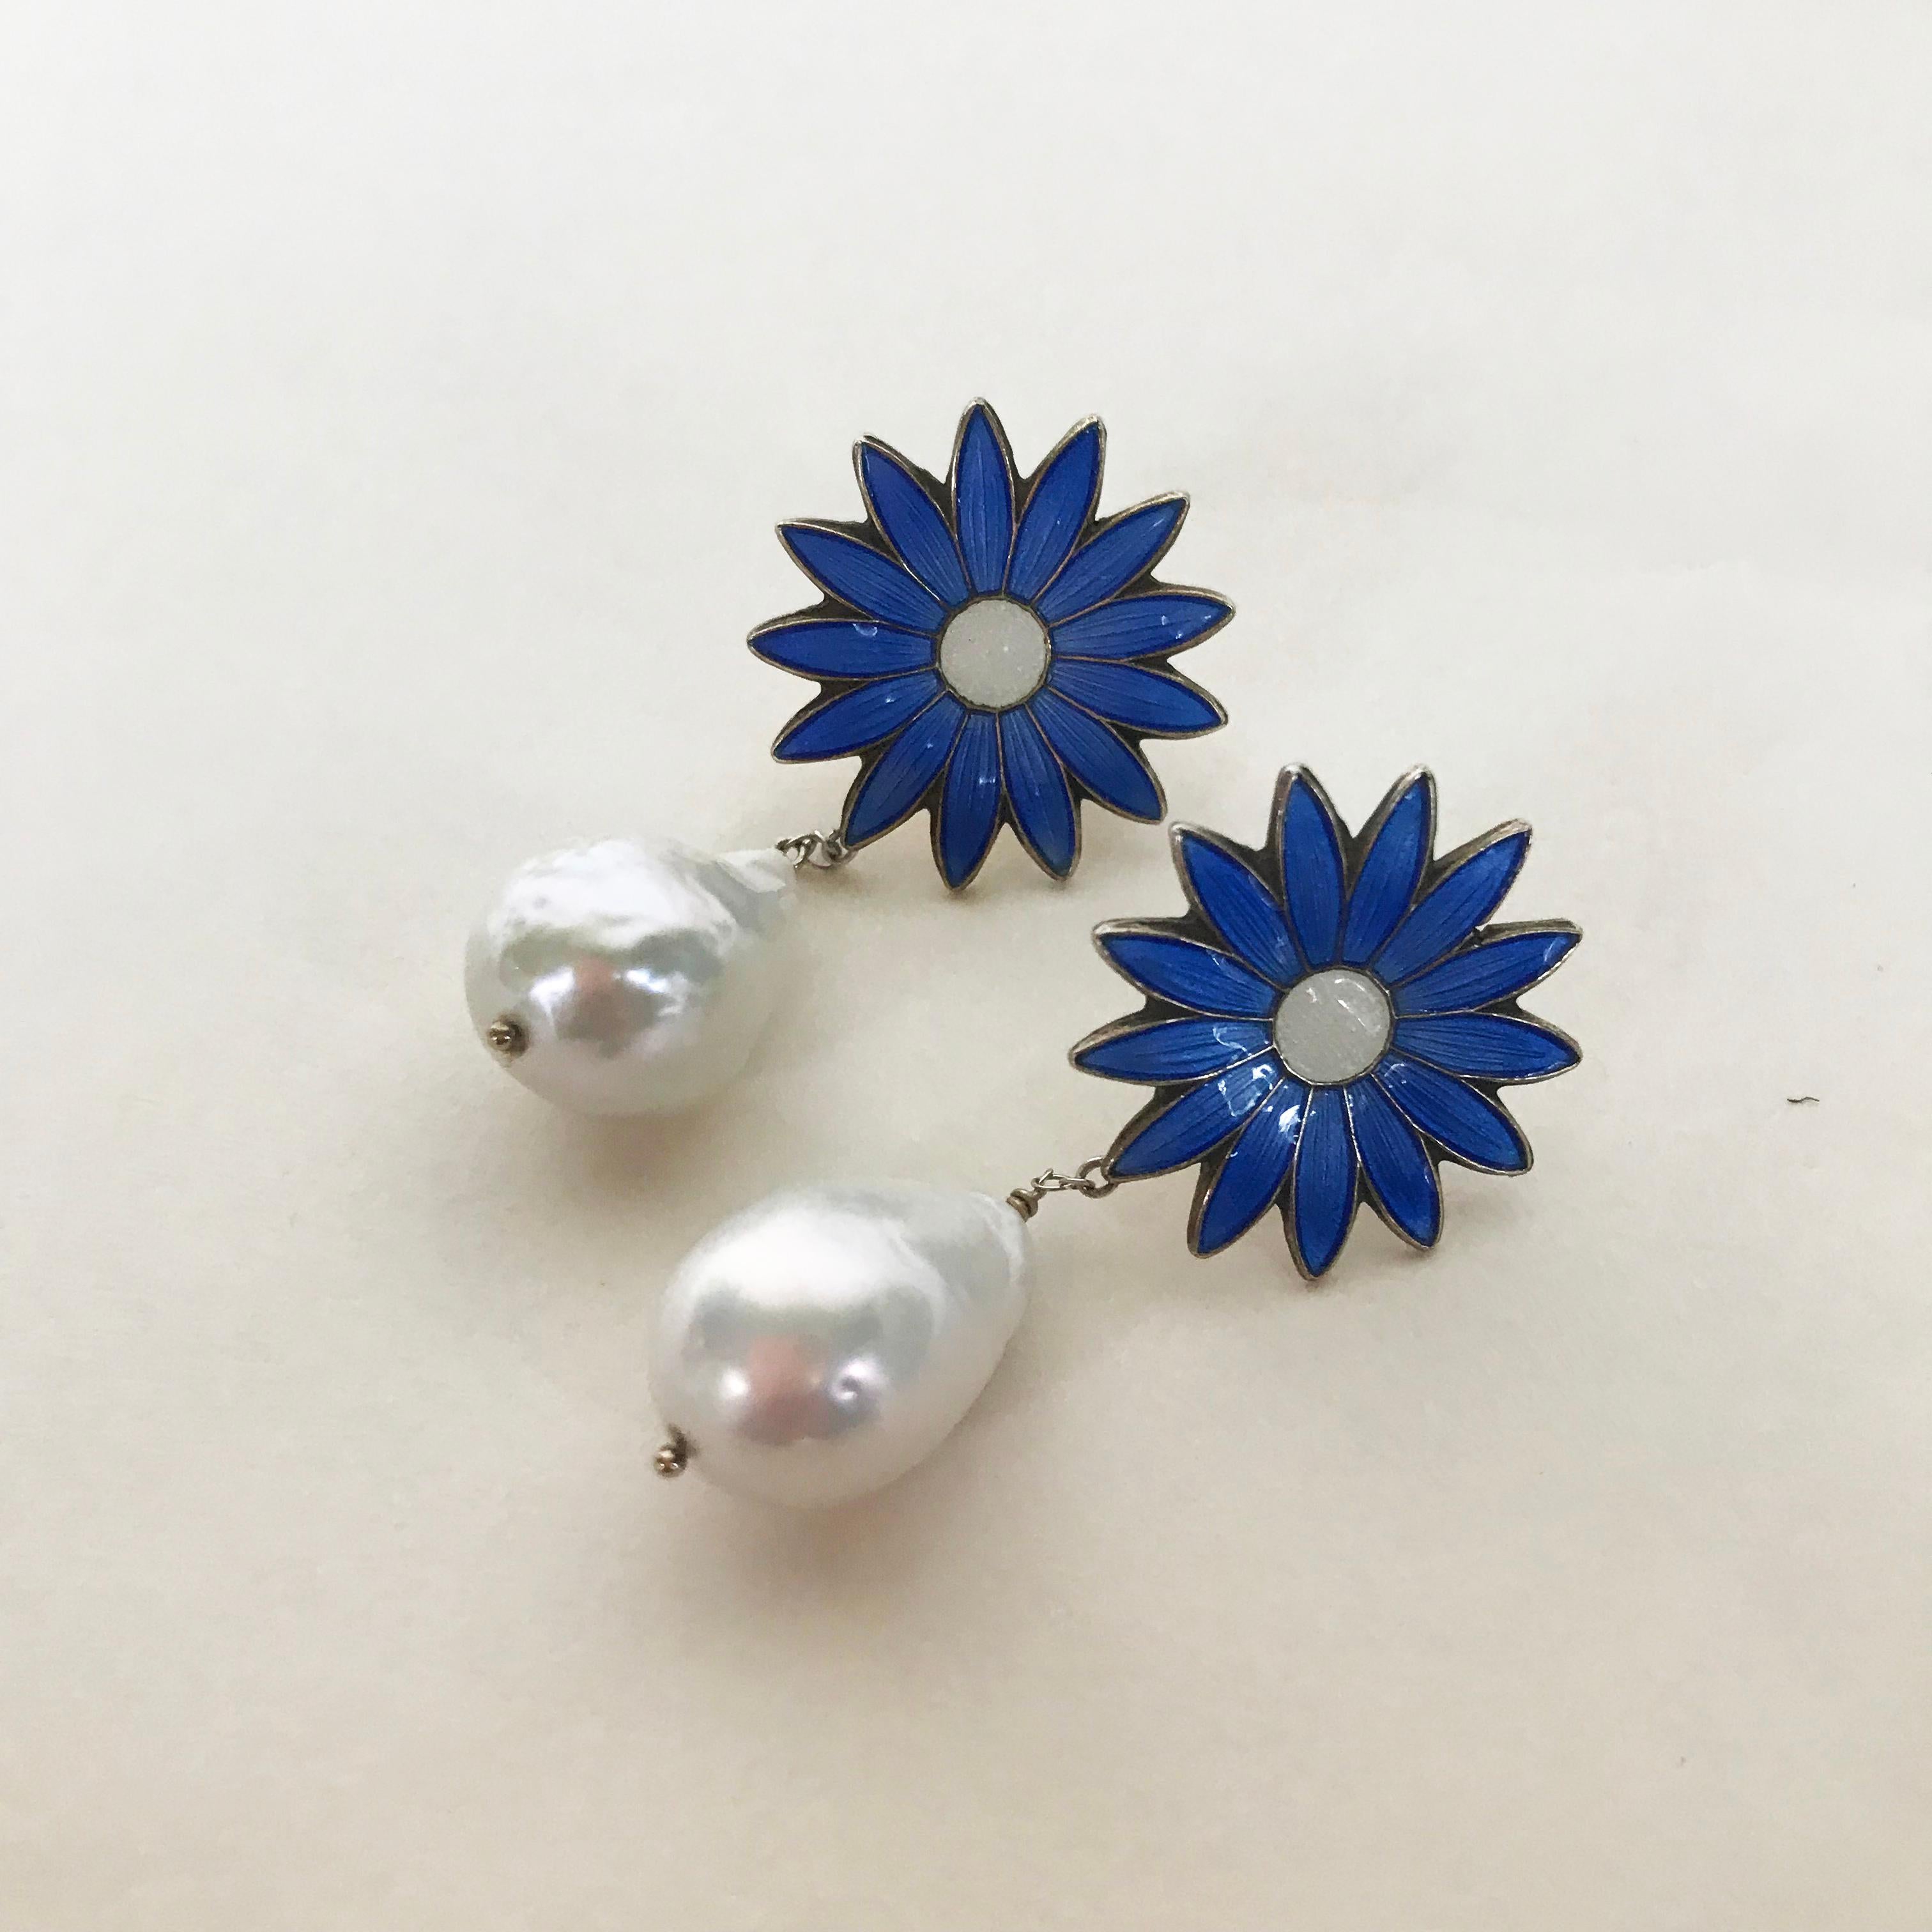 Women's Vintage Sterling Silver, Enamel with White Pearl and Stud Earrings by Marina J.